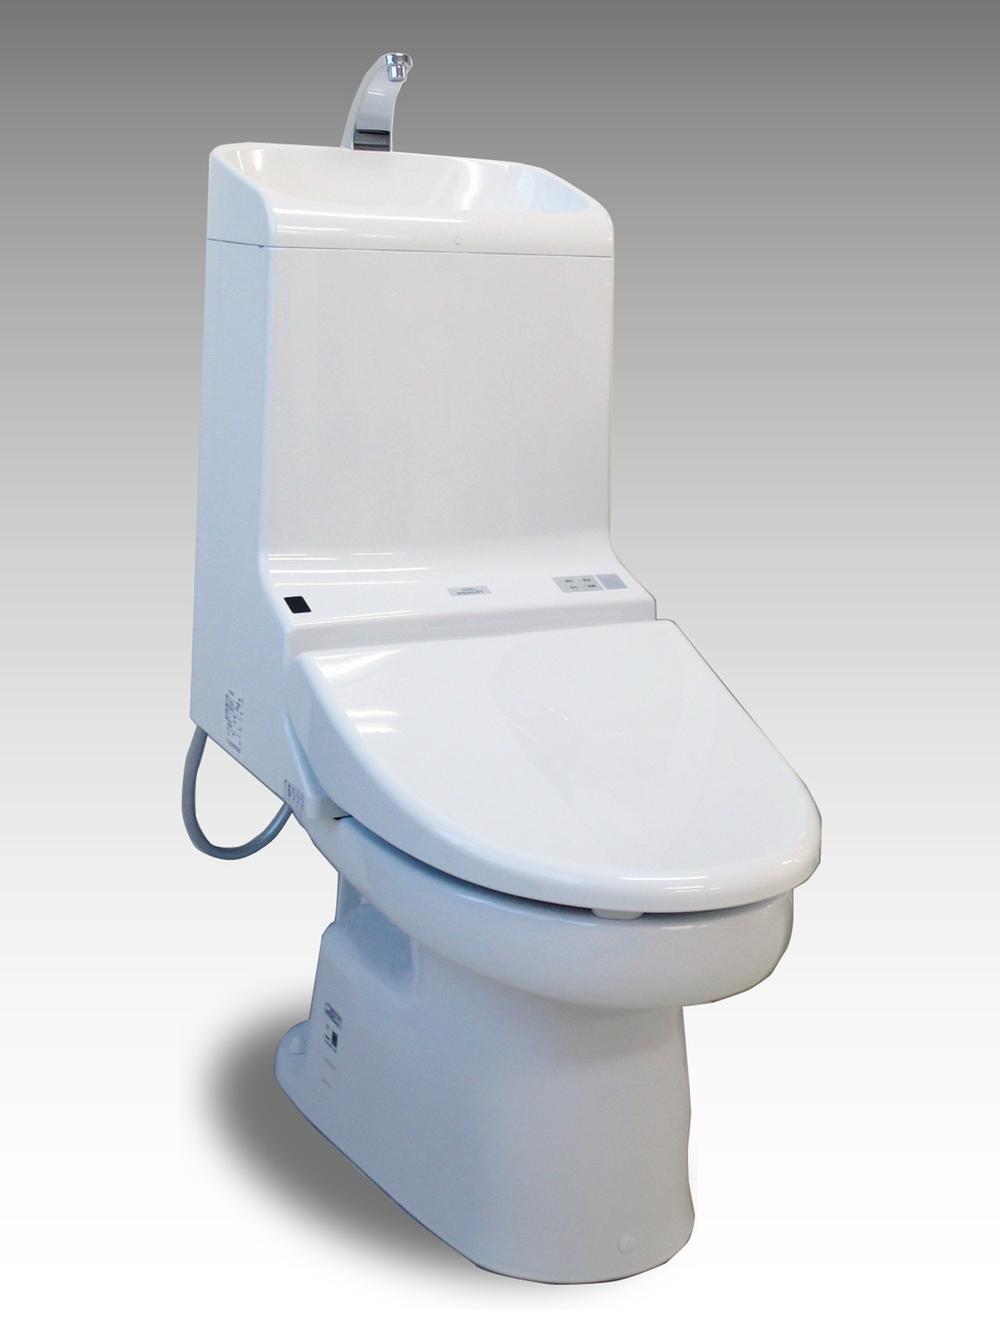 Other Equipment. Enhance the basic performance, Eliminating the sleeves on both sides, Washlet is an integrated toilet. In a large bowl handwashing and new borderless shape, Achieve a more easy-to-use and clean toilets space.